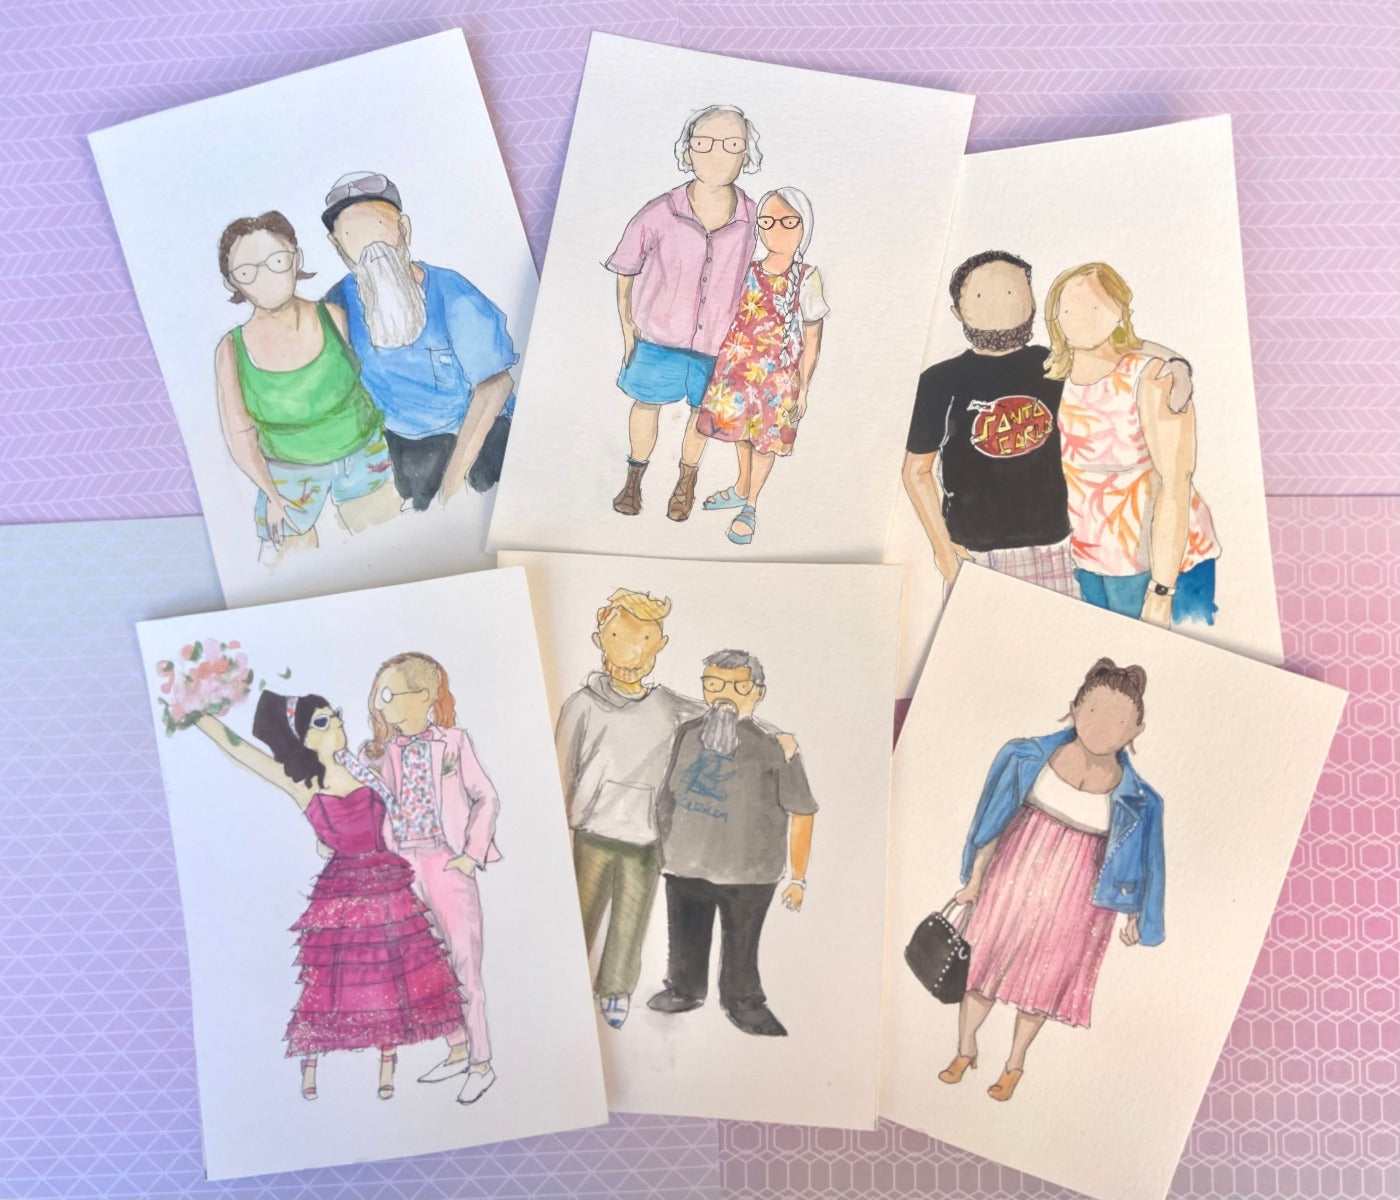 Custom Painted Watercolor Illustration from Photo, custom made painting, hand painted portraits